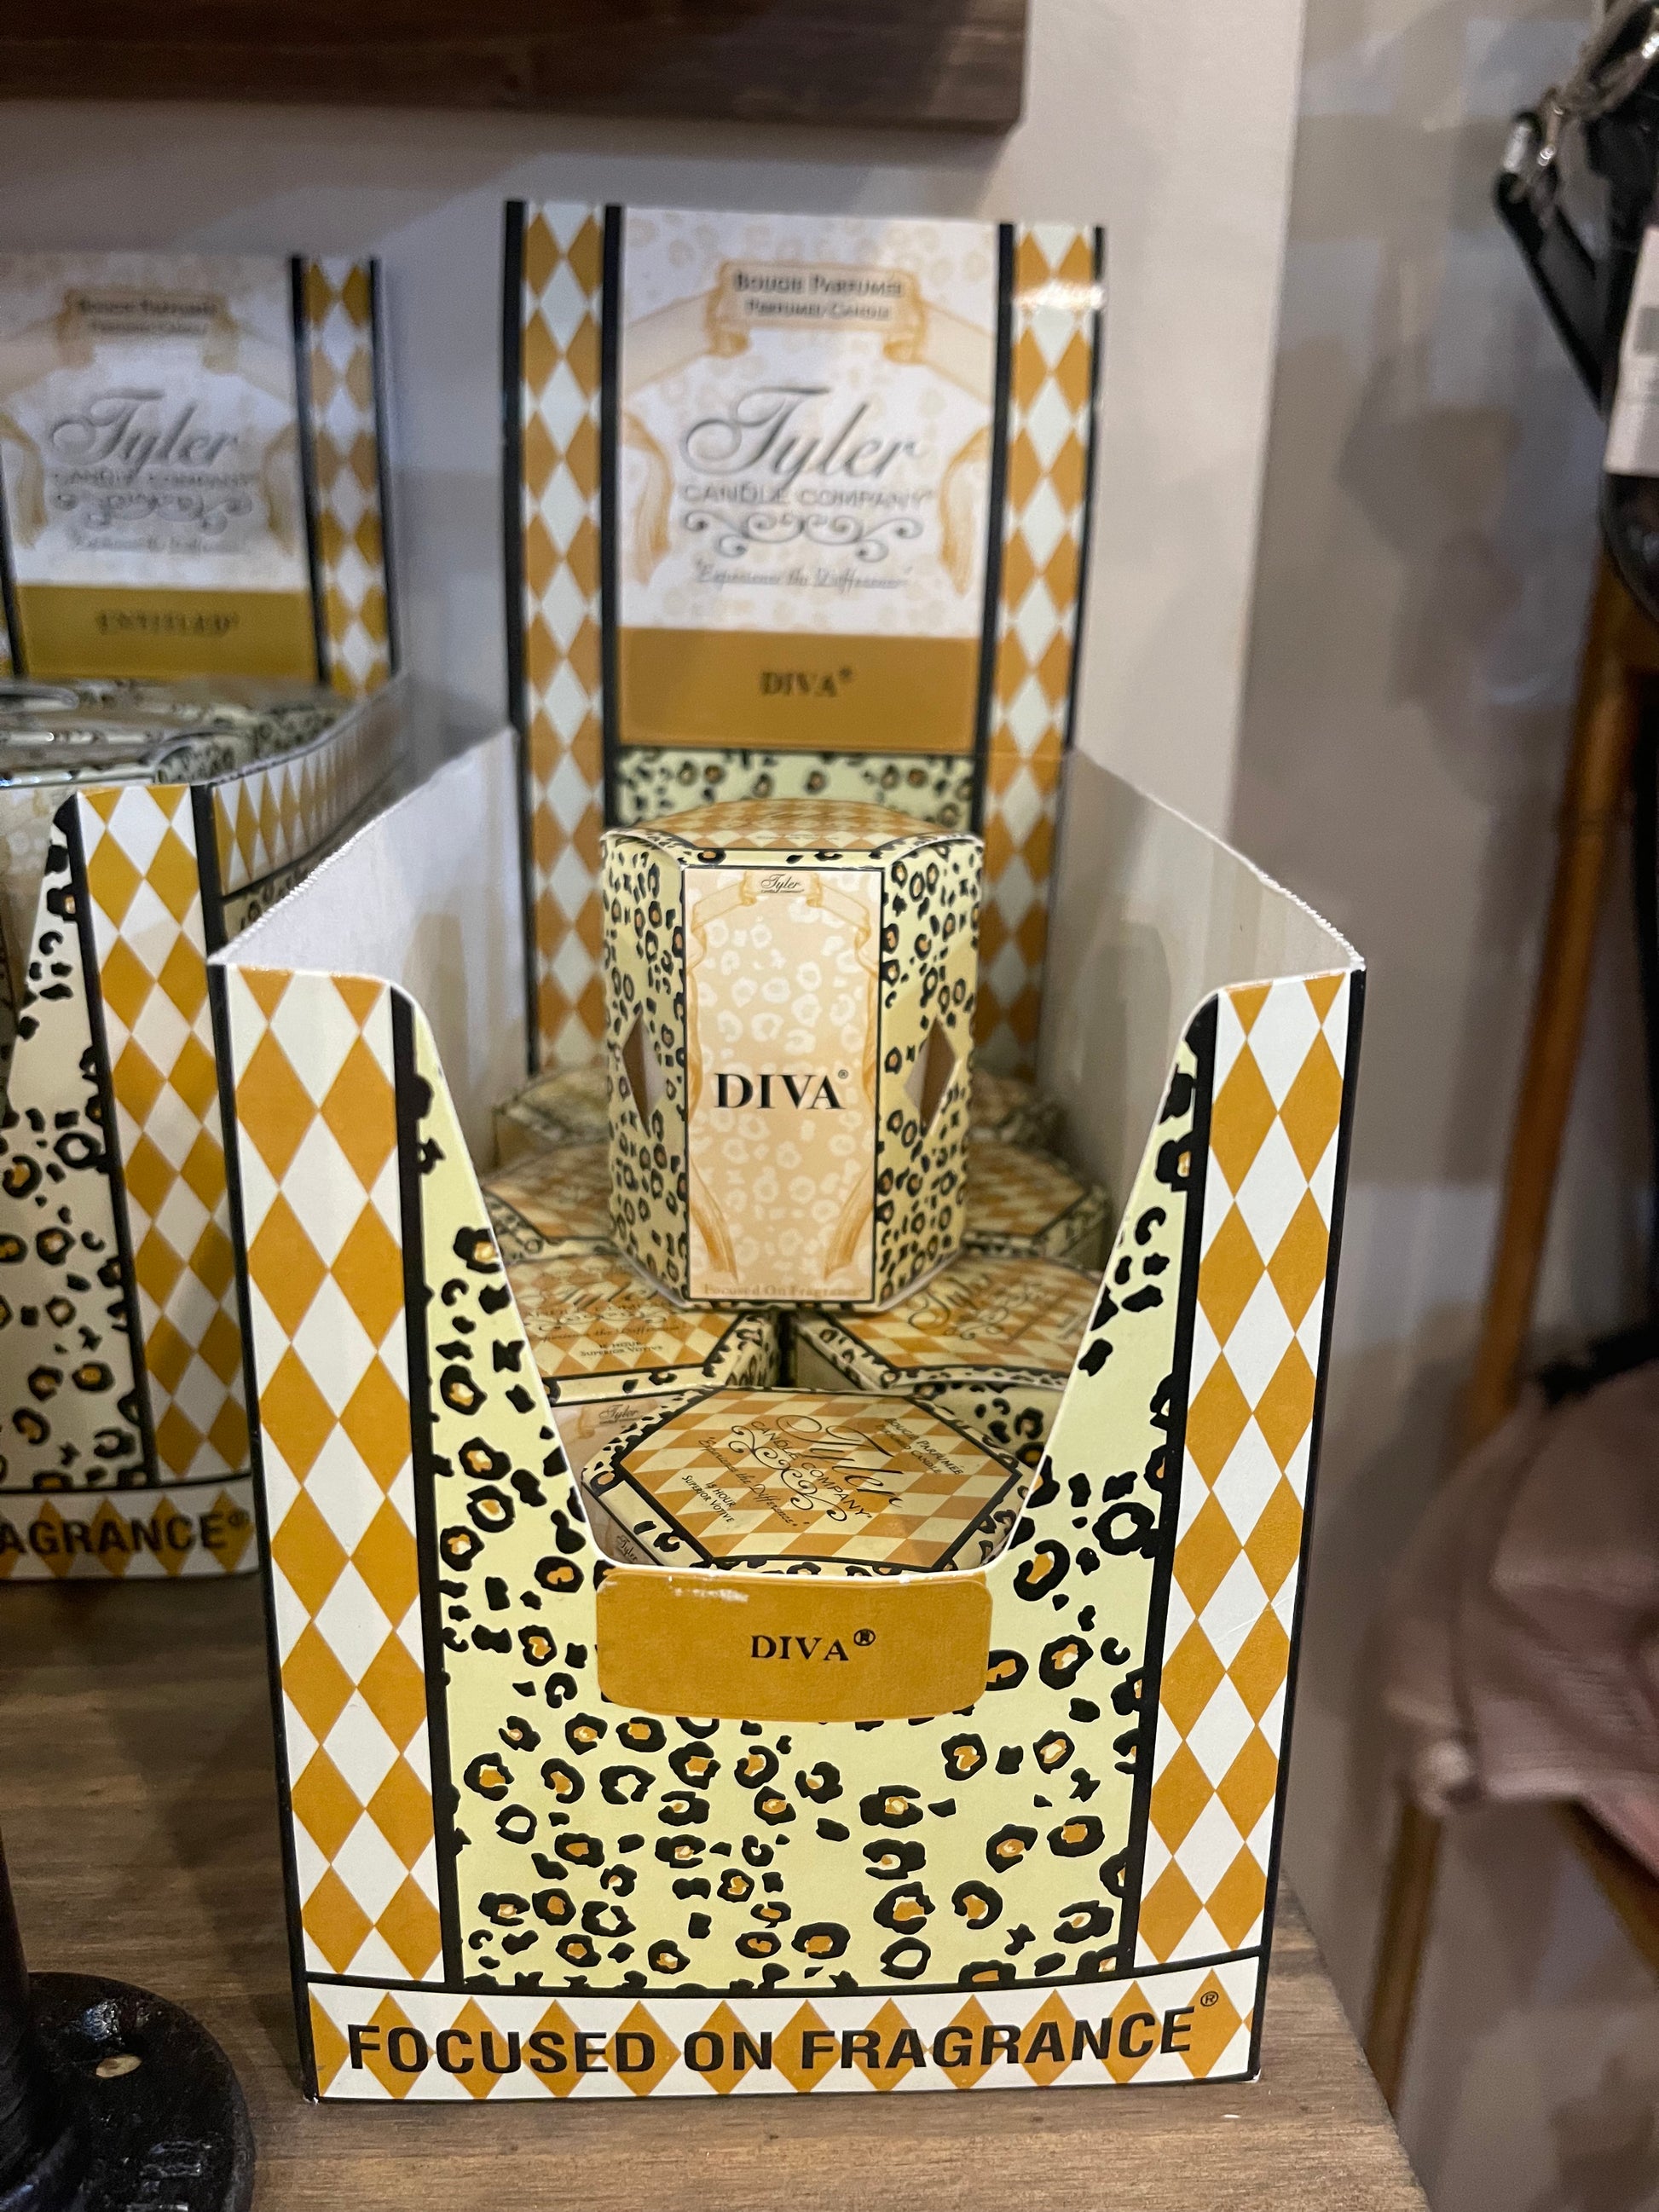 "Diva" Tyler Candle Company Votive Candles.